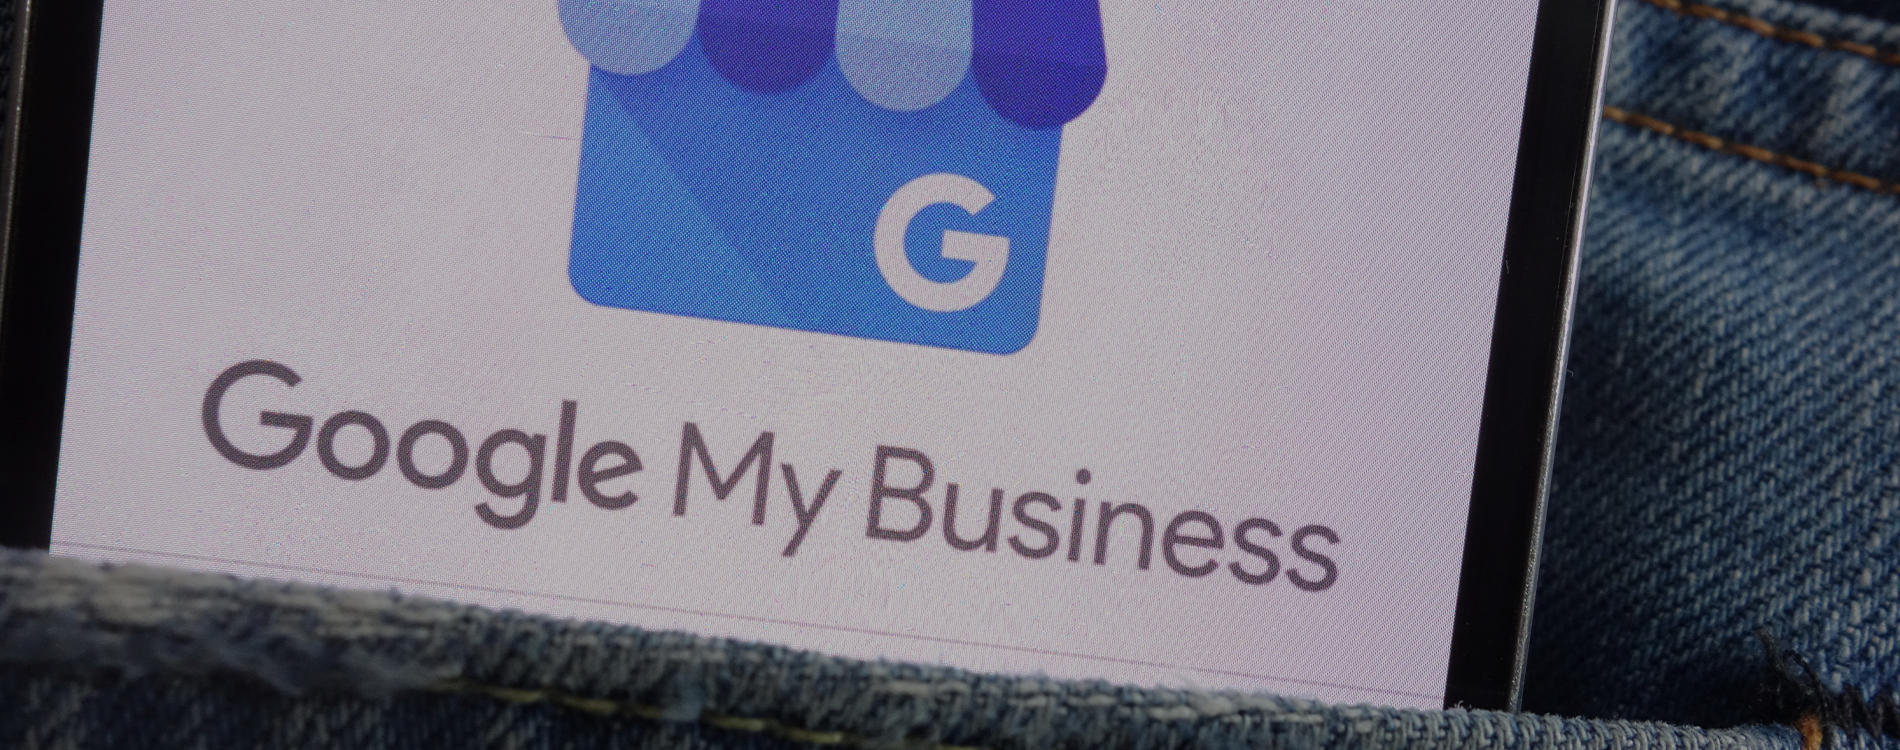 Google My Business: Products vs Services